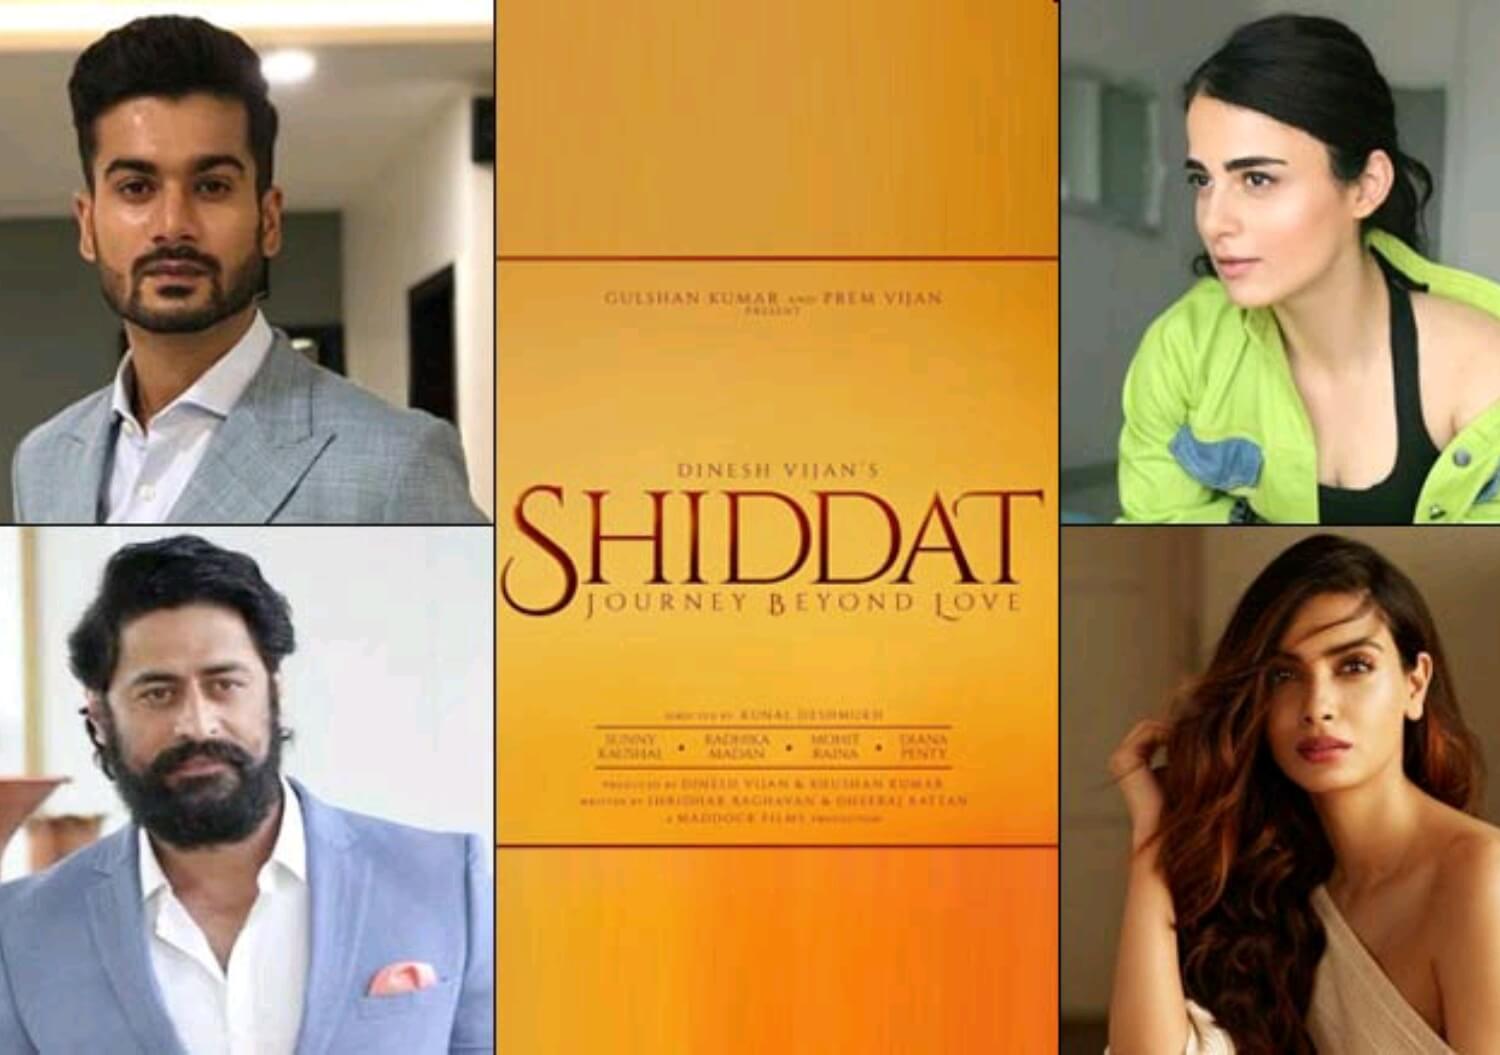 Take A Ride On The Journey of Love With Shiddat